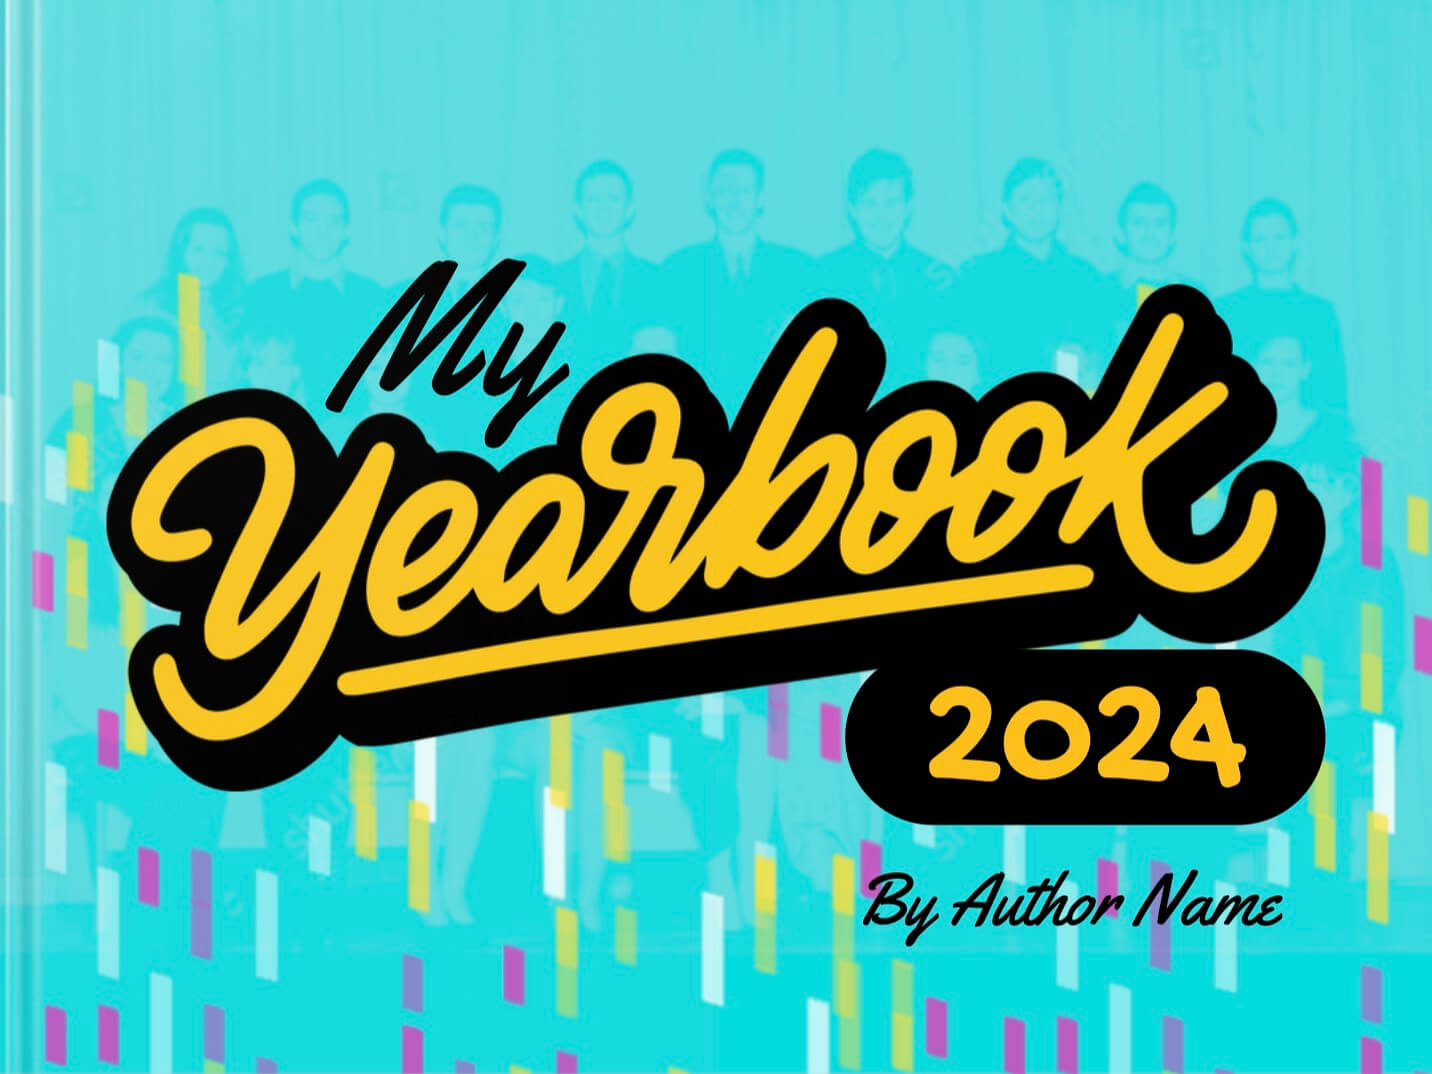 Yearbook 2024